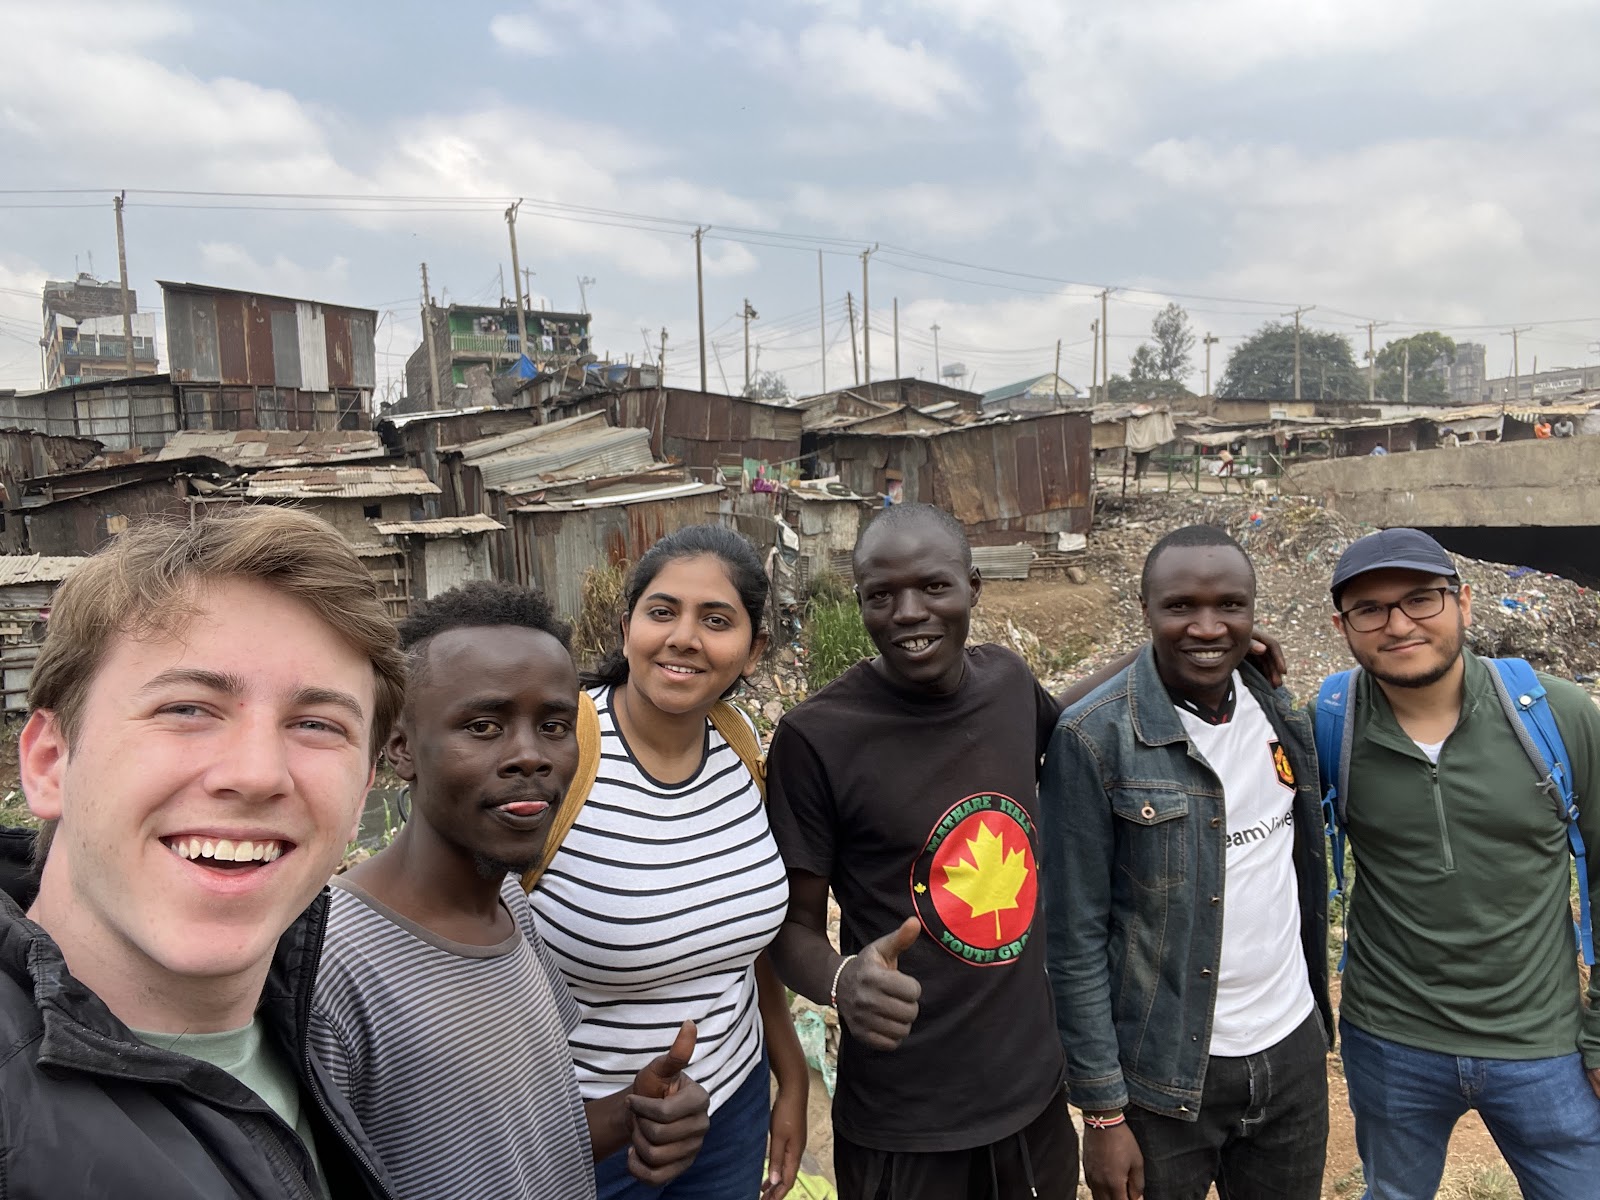 a group of six people posing for a selfie. All are smiling and standing in front of an informal settlement, with makeshift structures and debris visible in the background under a cloudy sky.